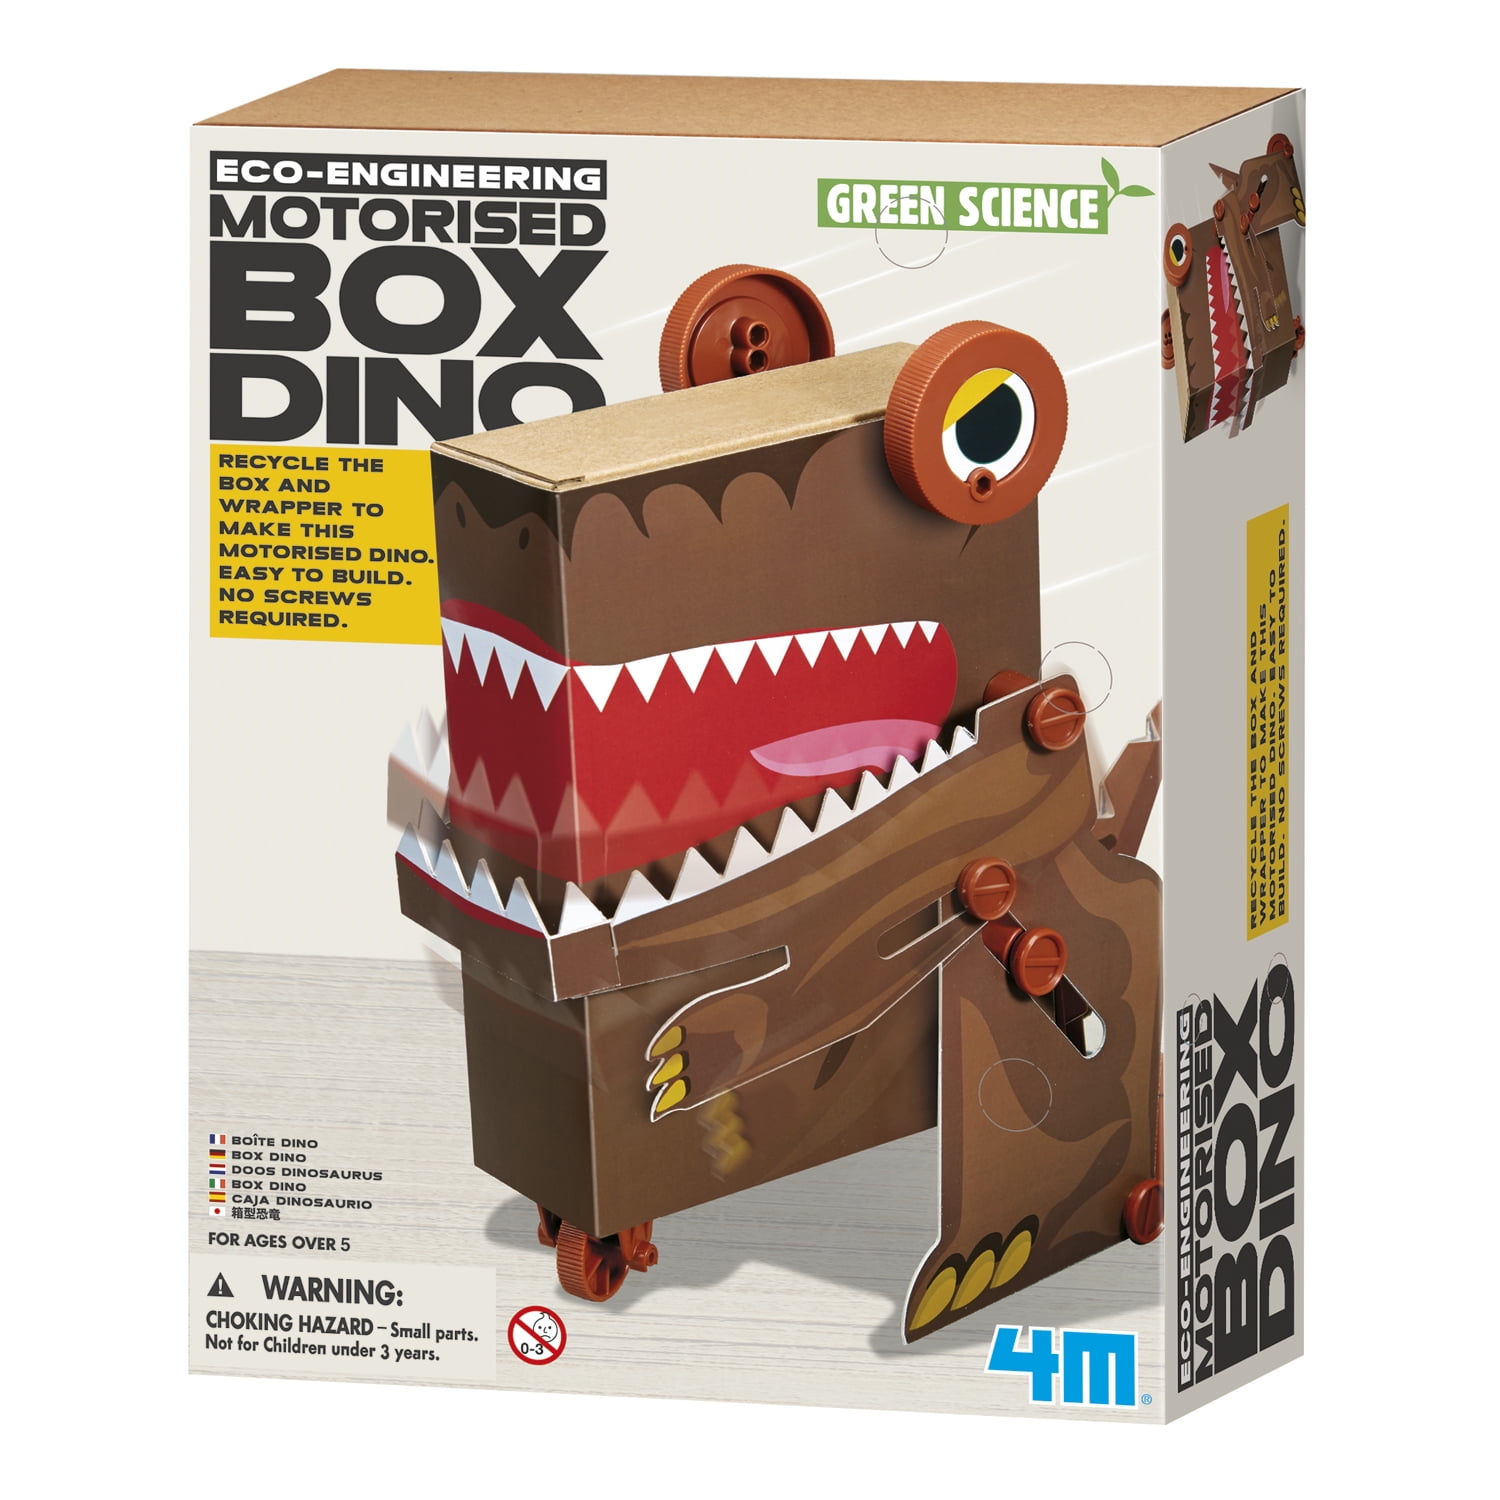 Box Dino by 4M Green Science Motorised Eco-Engineering Creative Educational Toy 